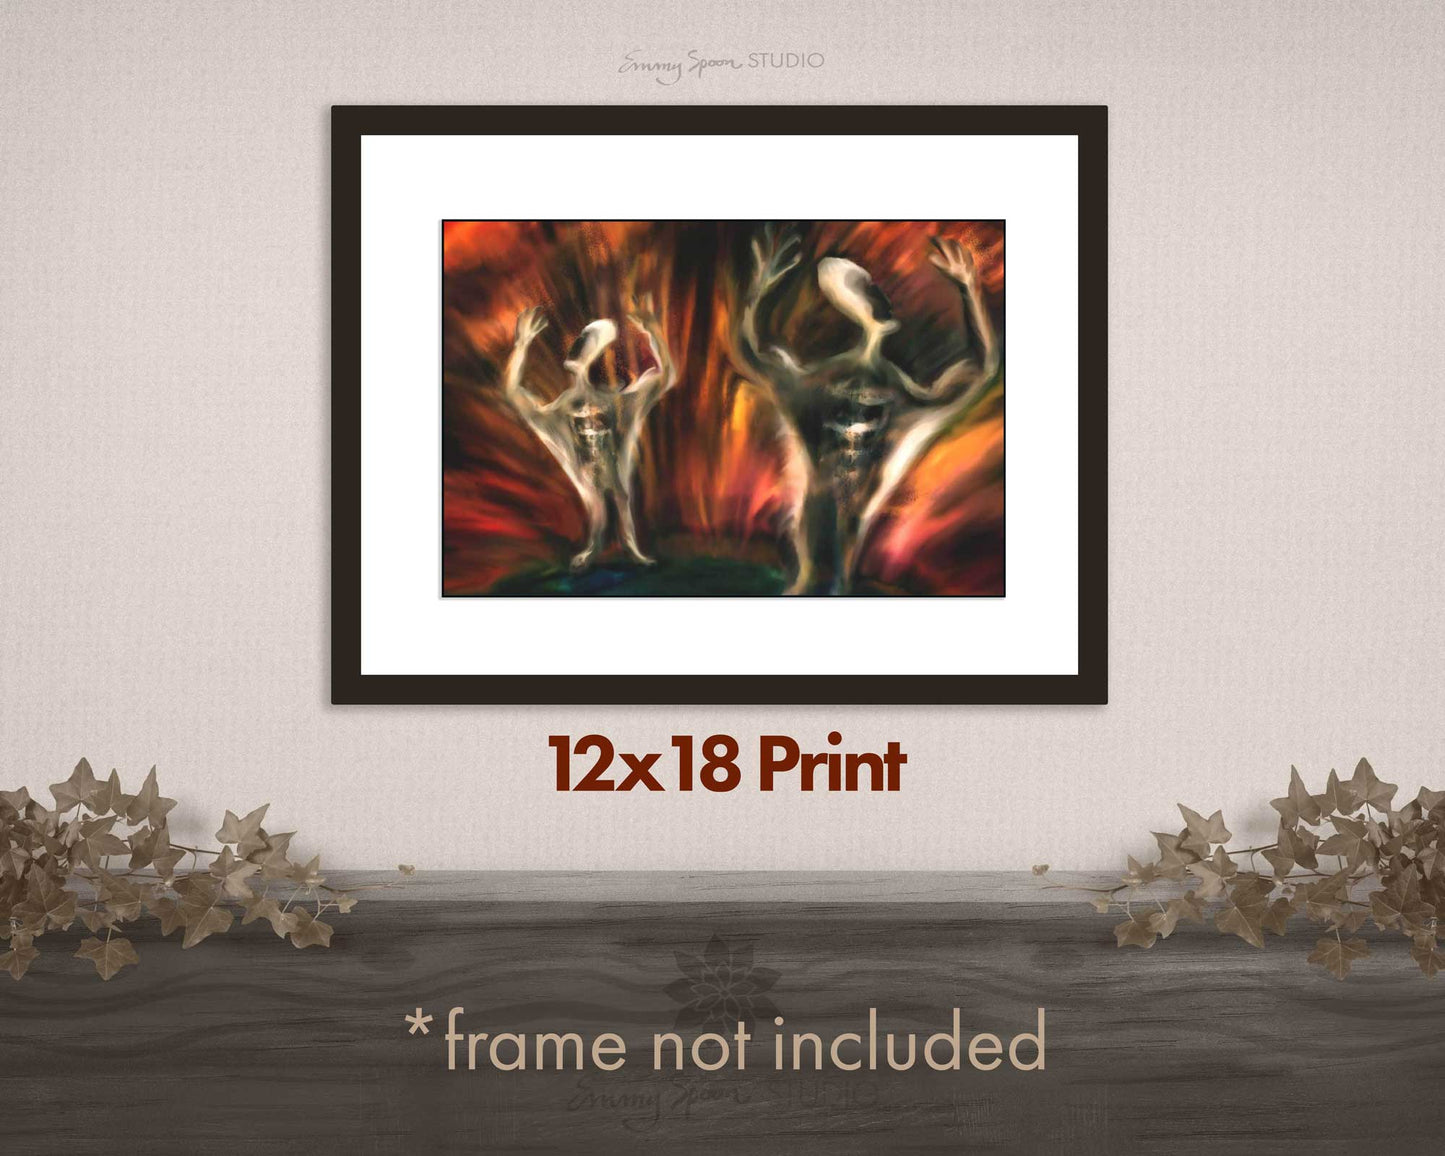 Bang 2012 Original Giclée Art Prints by Emmy Spoon 12x18 Print *frame not included